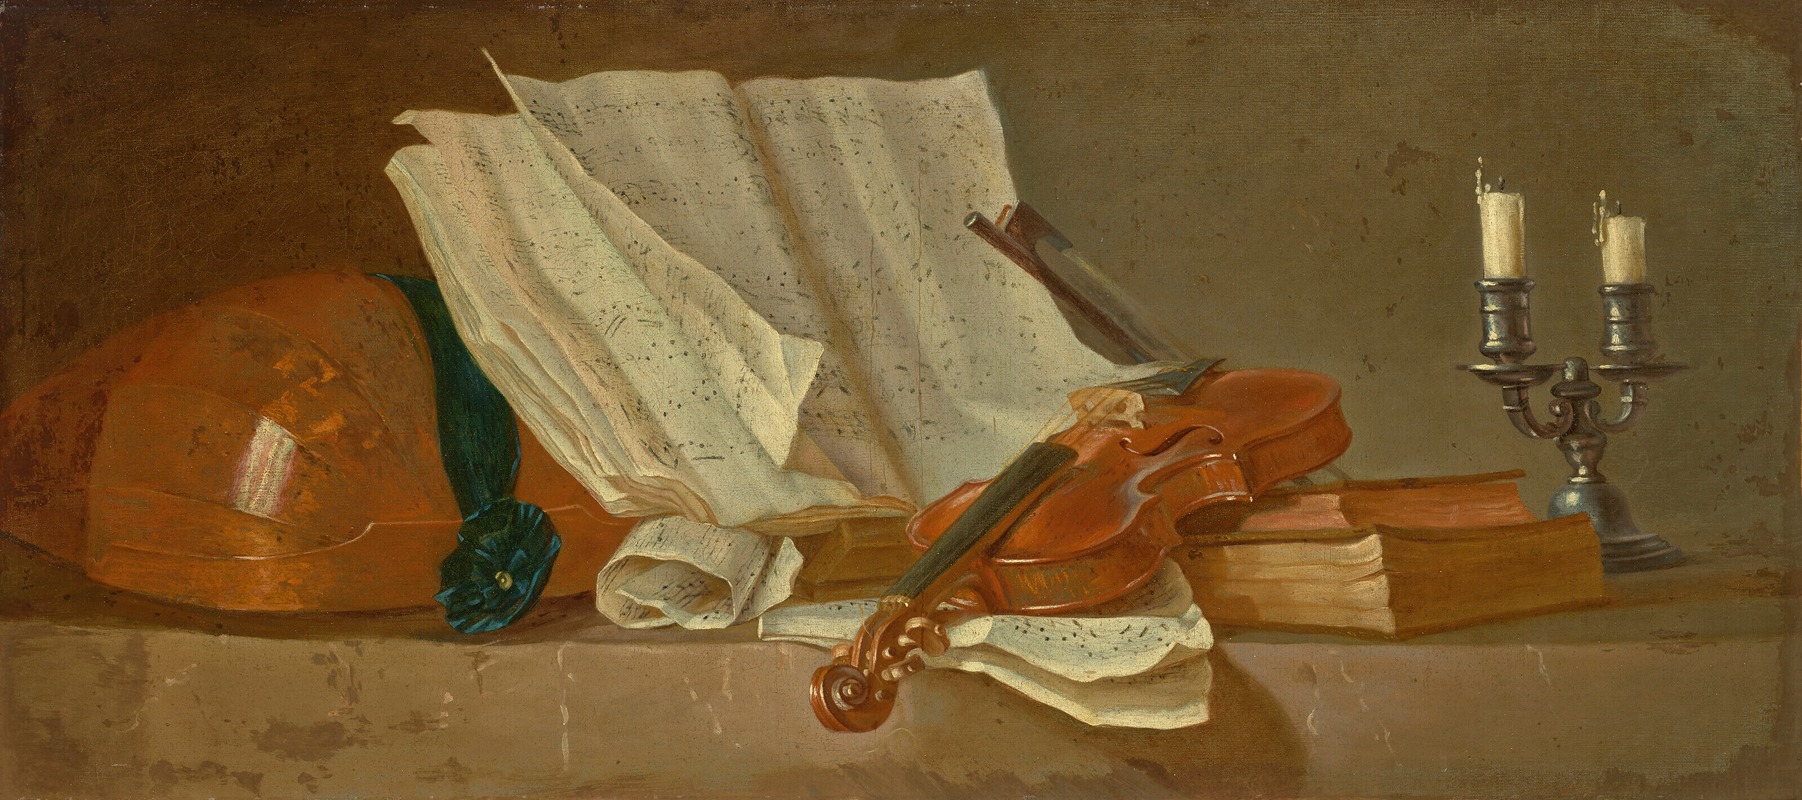 Henri-Horace Roland De La Porte - A musical score on a reading stand, a violin and a bow, a lute, a candlestick and books on a ledge